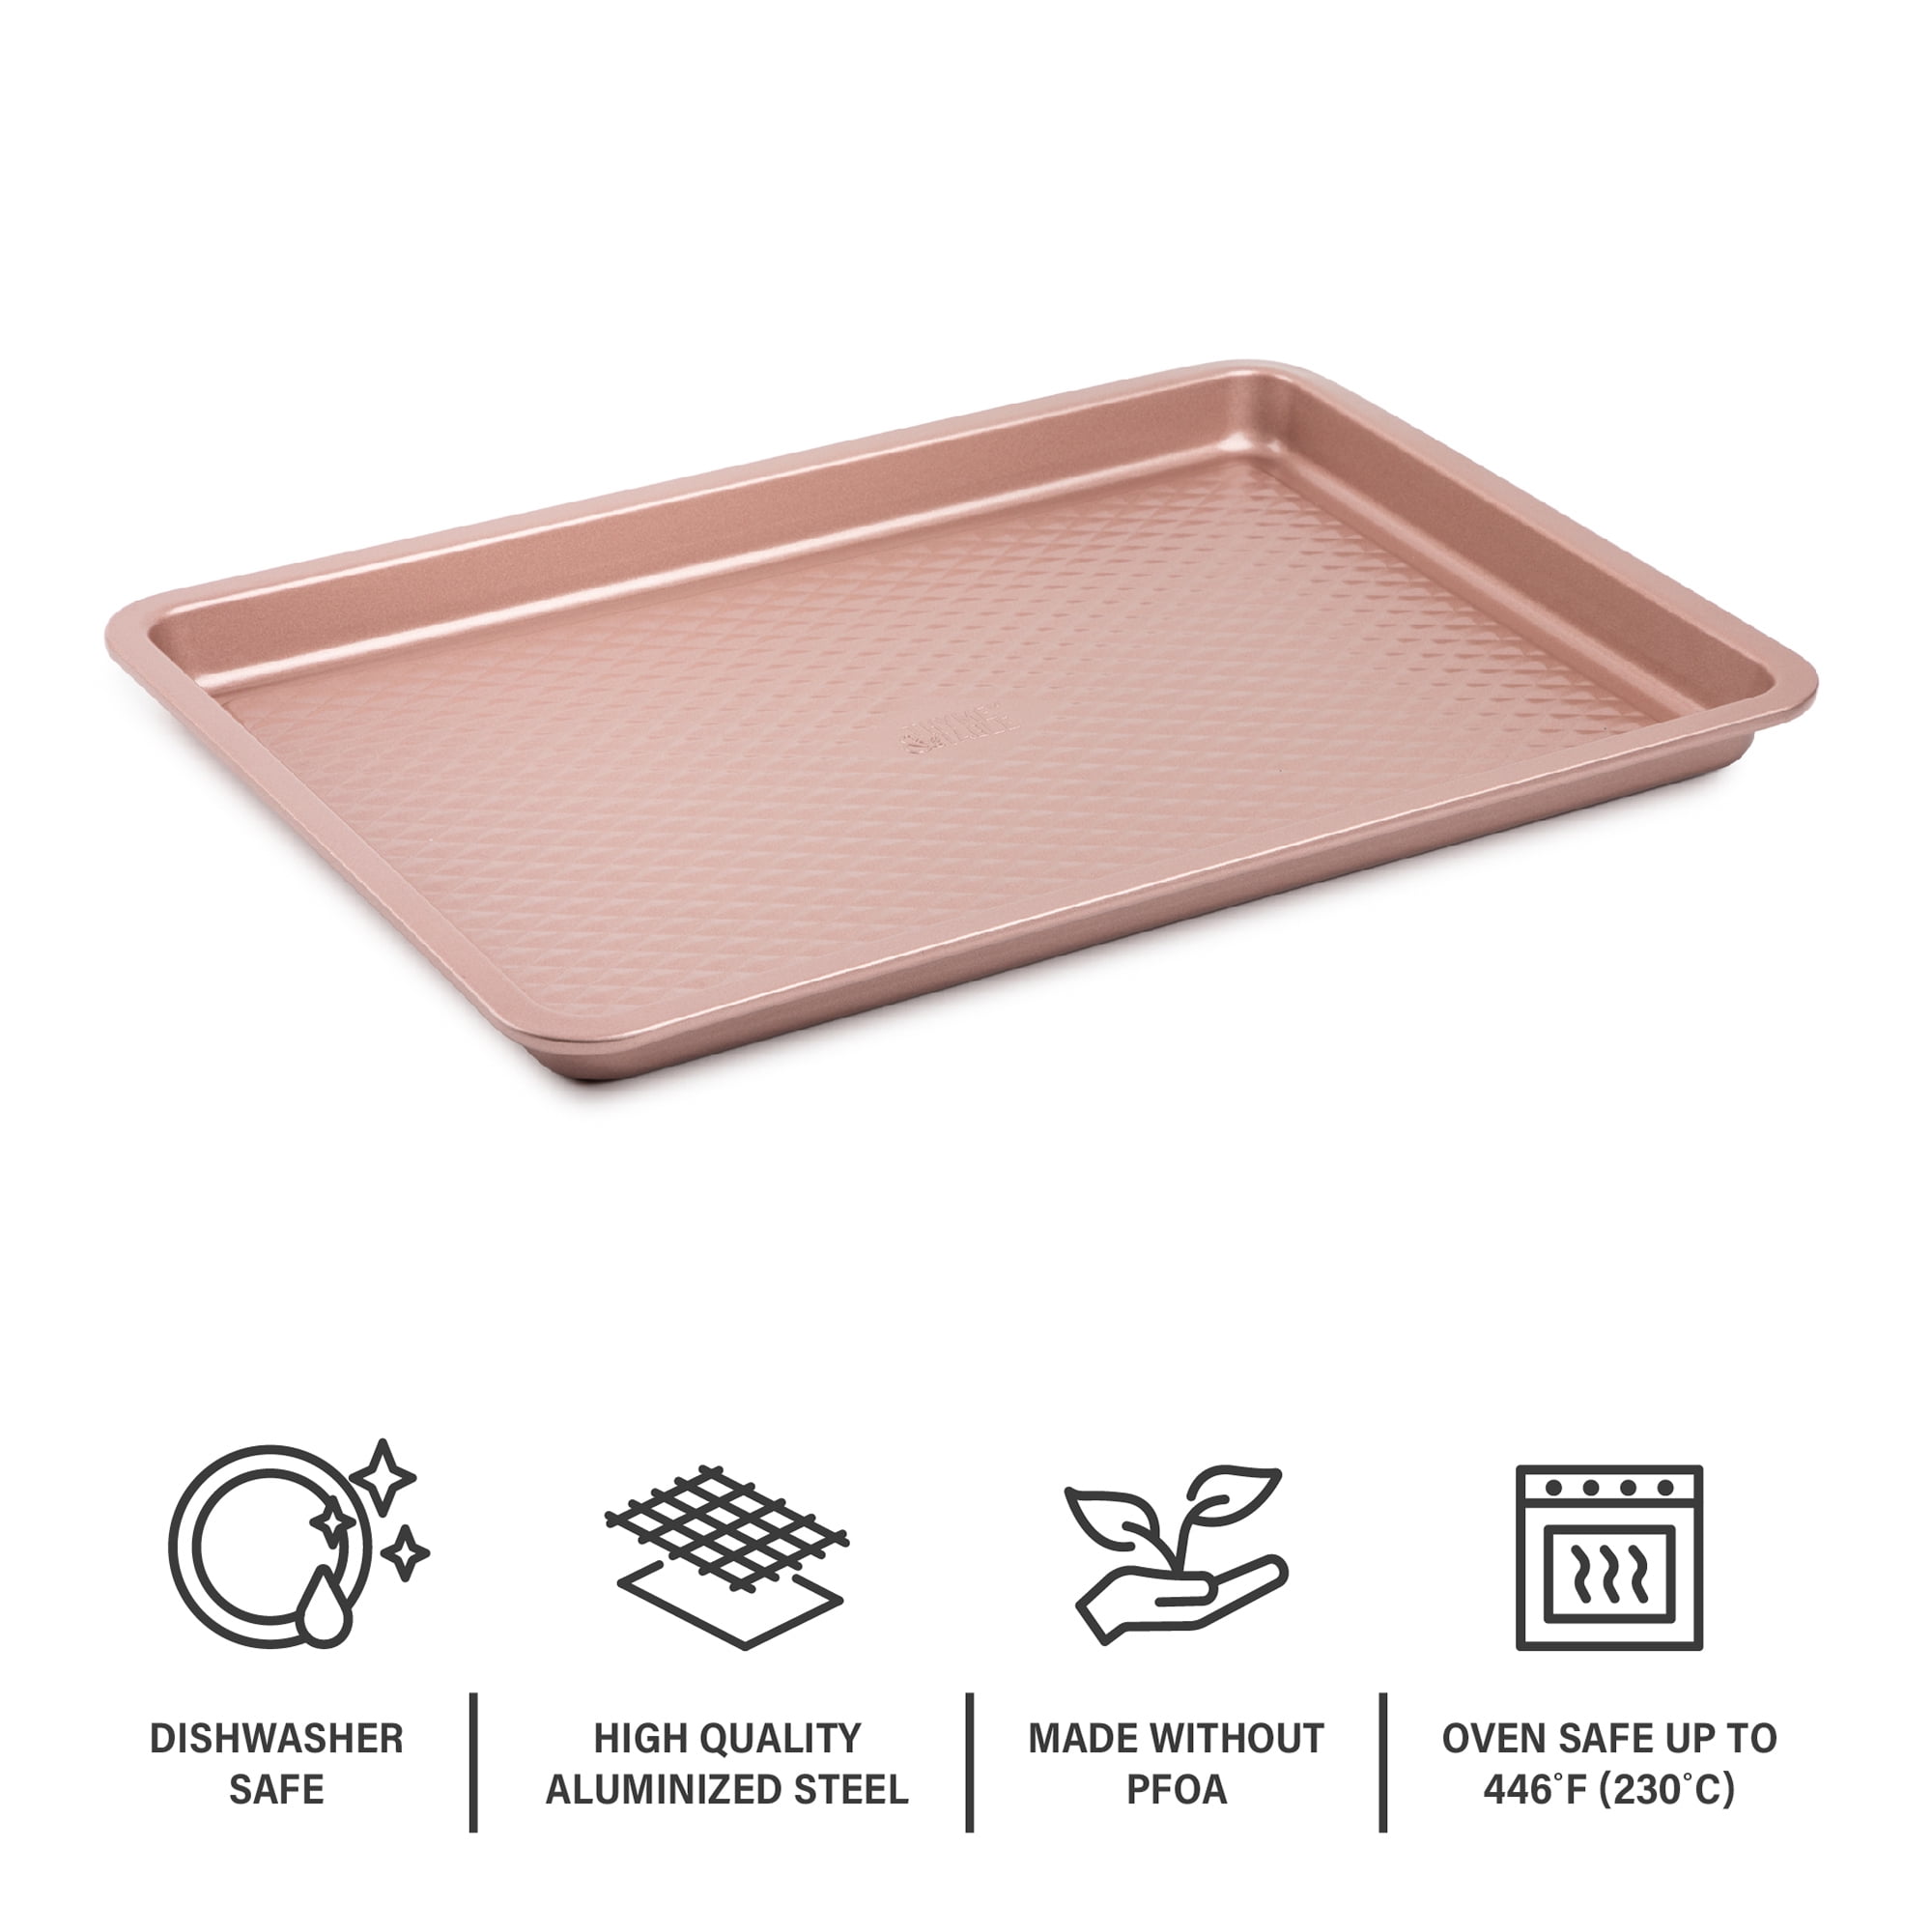  DecorRack Non-Stick Baking Sheet, 15 x 10 Inch Jelly Roll Pan  and Cookie Baking Tray, Heavy Duty Bakeware For Oven (Pack of 1): Home &  Kitchen